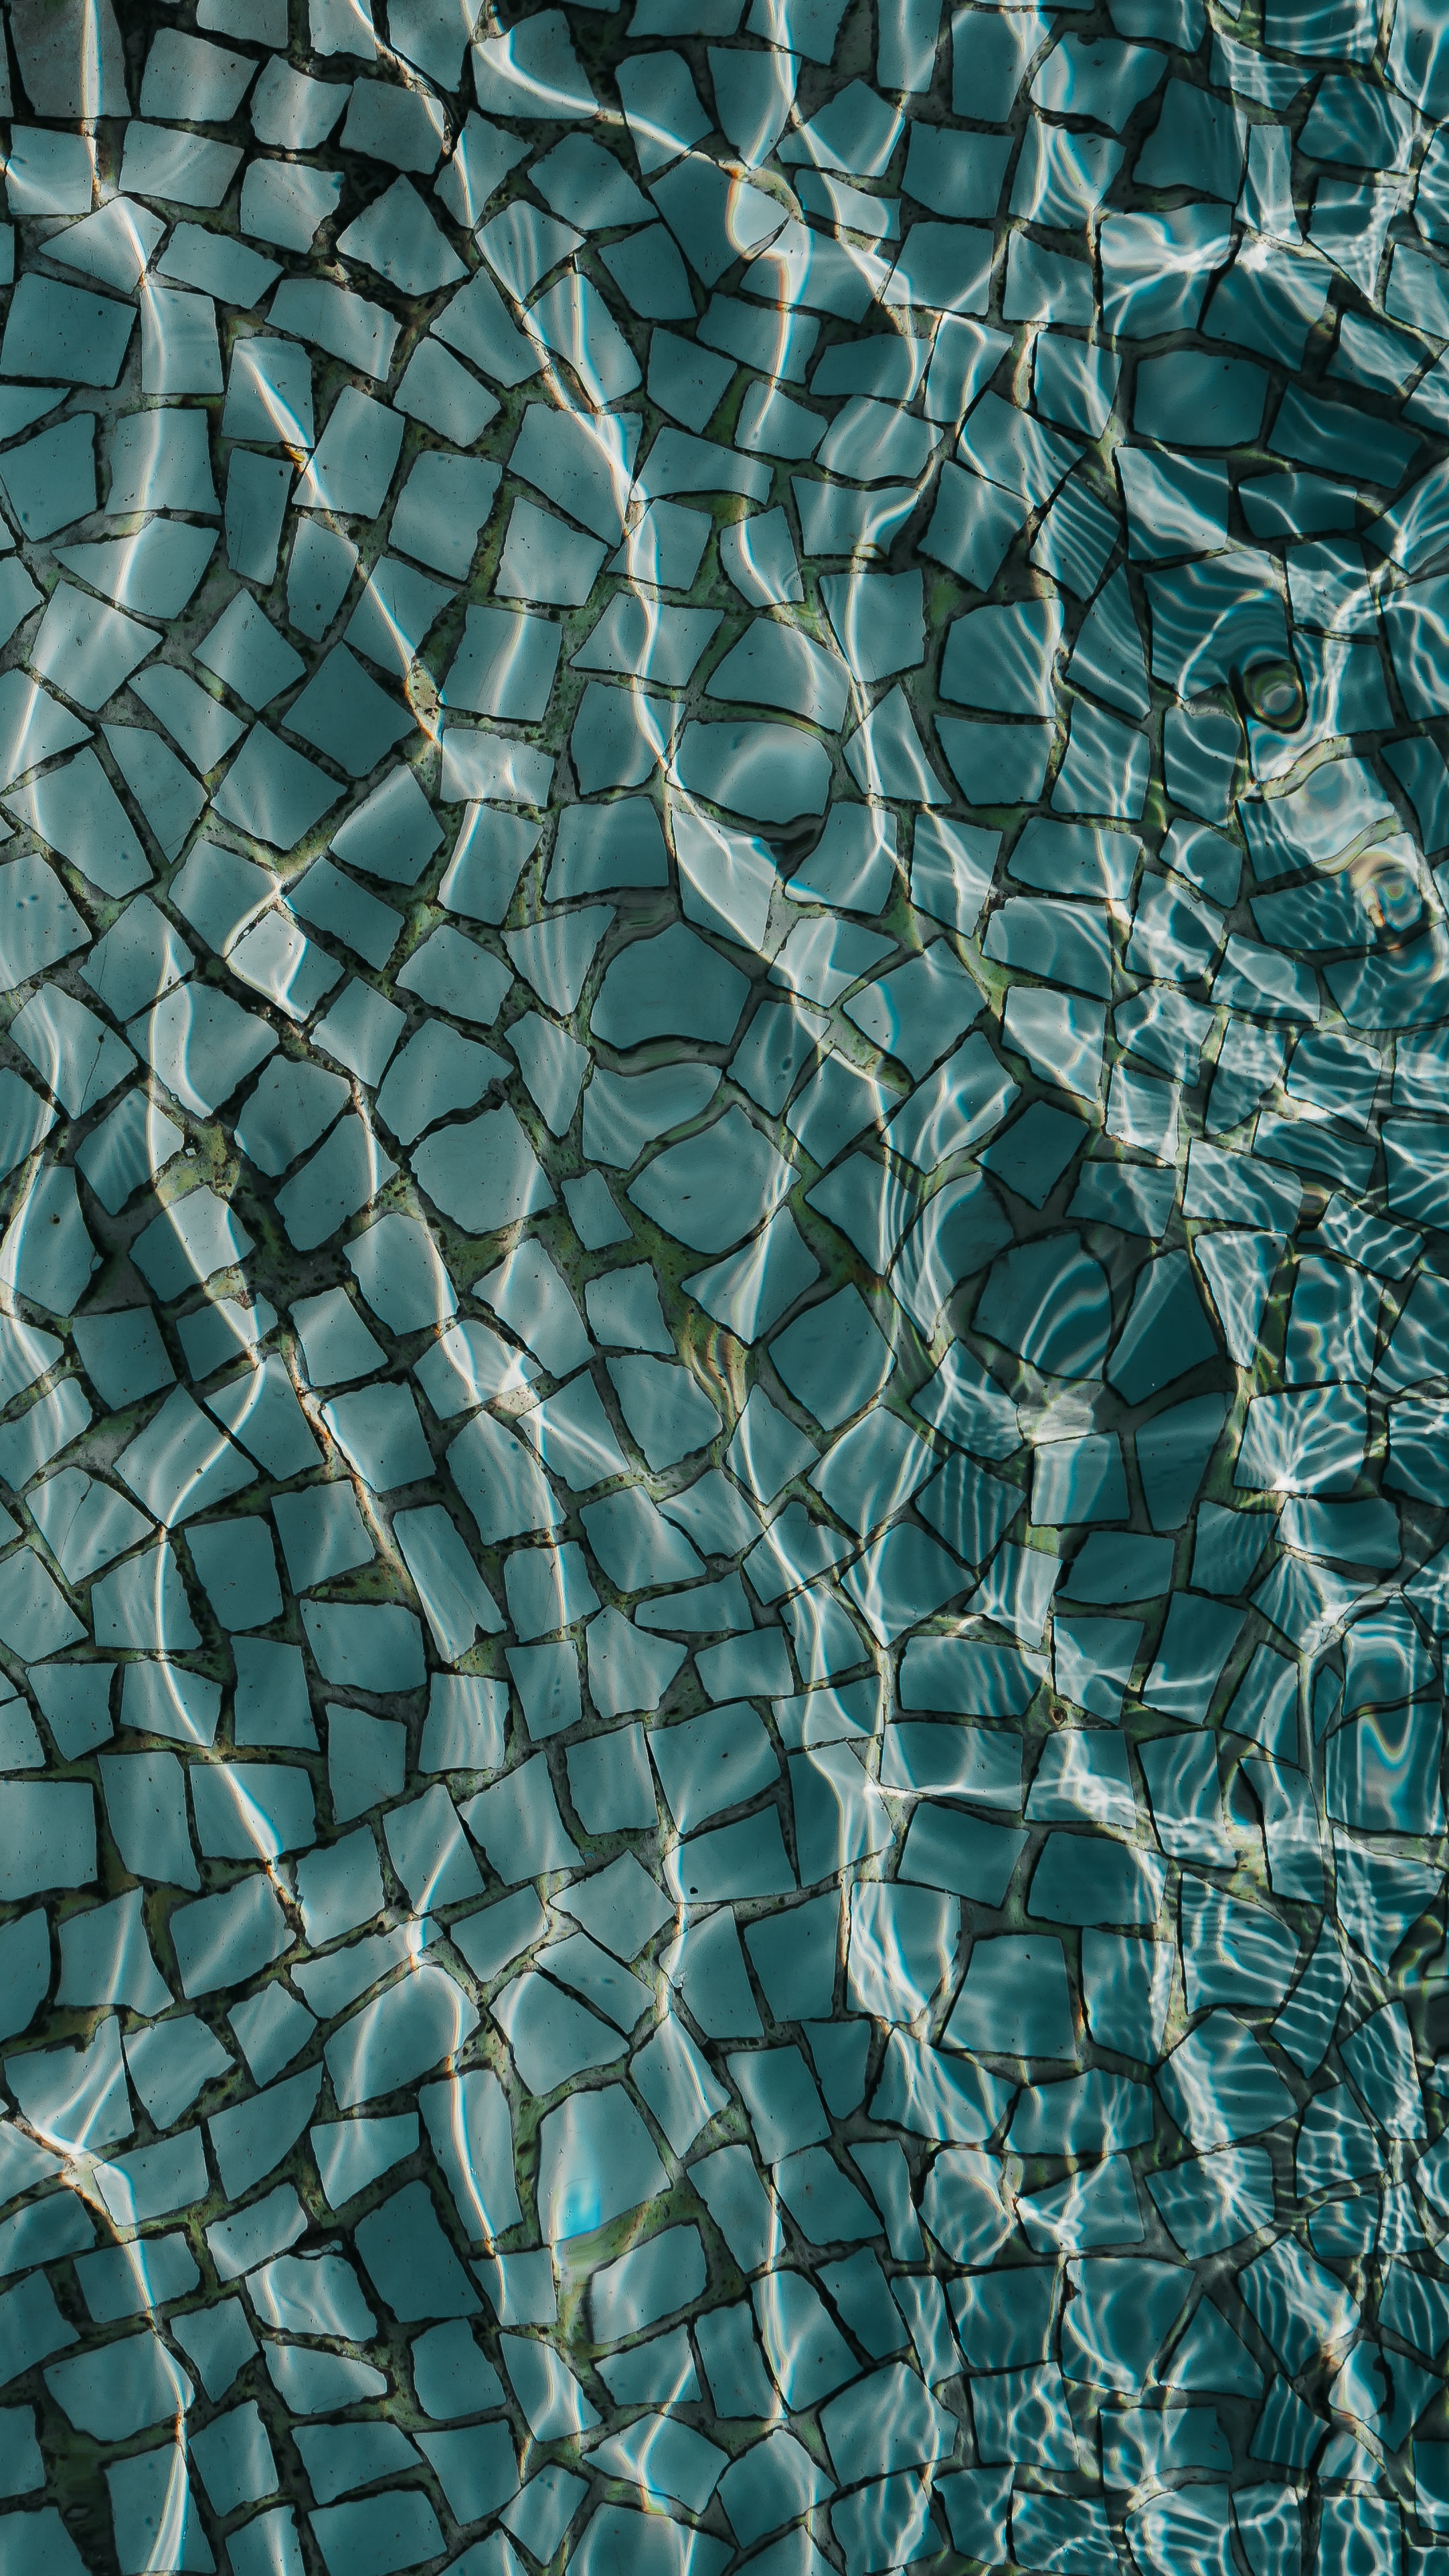 60582 download wallpaper texture, water, glare, textures, surface, tile screensavers and pictures for free